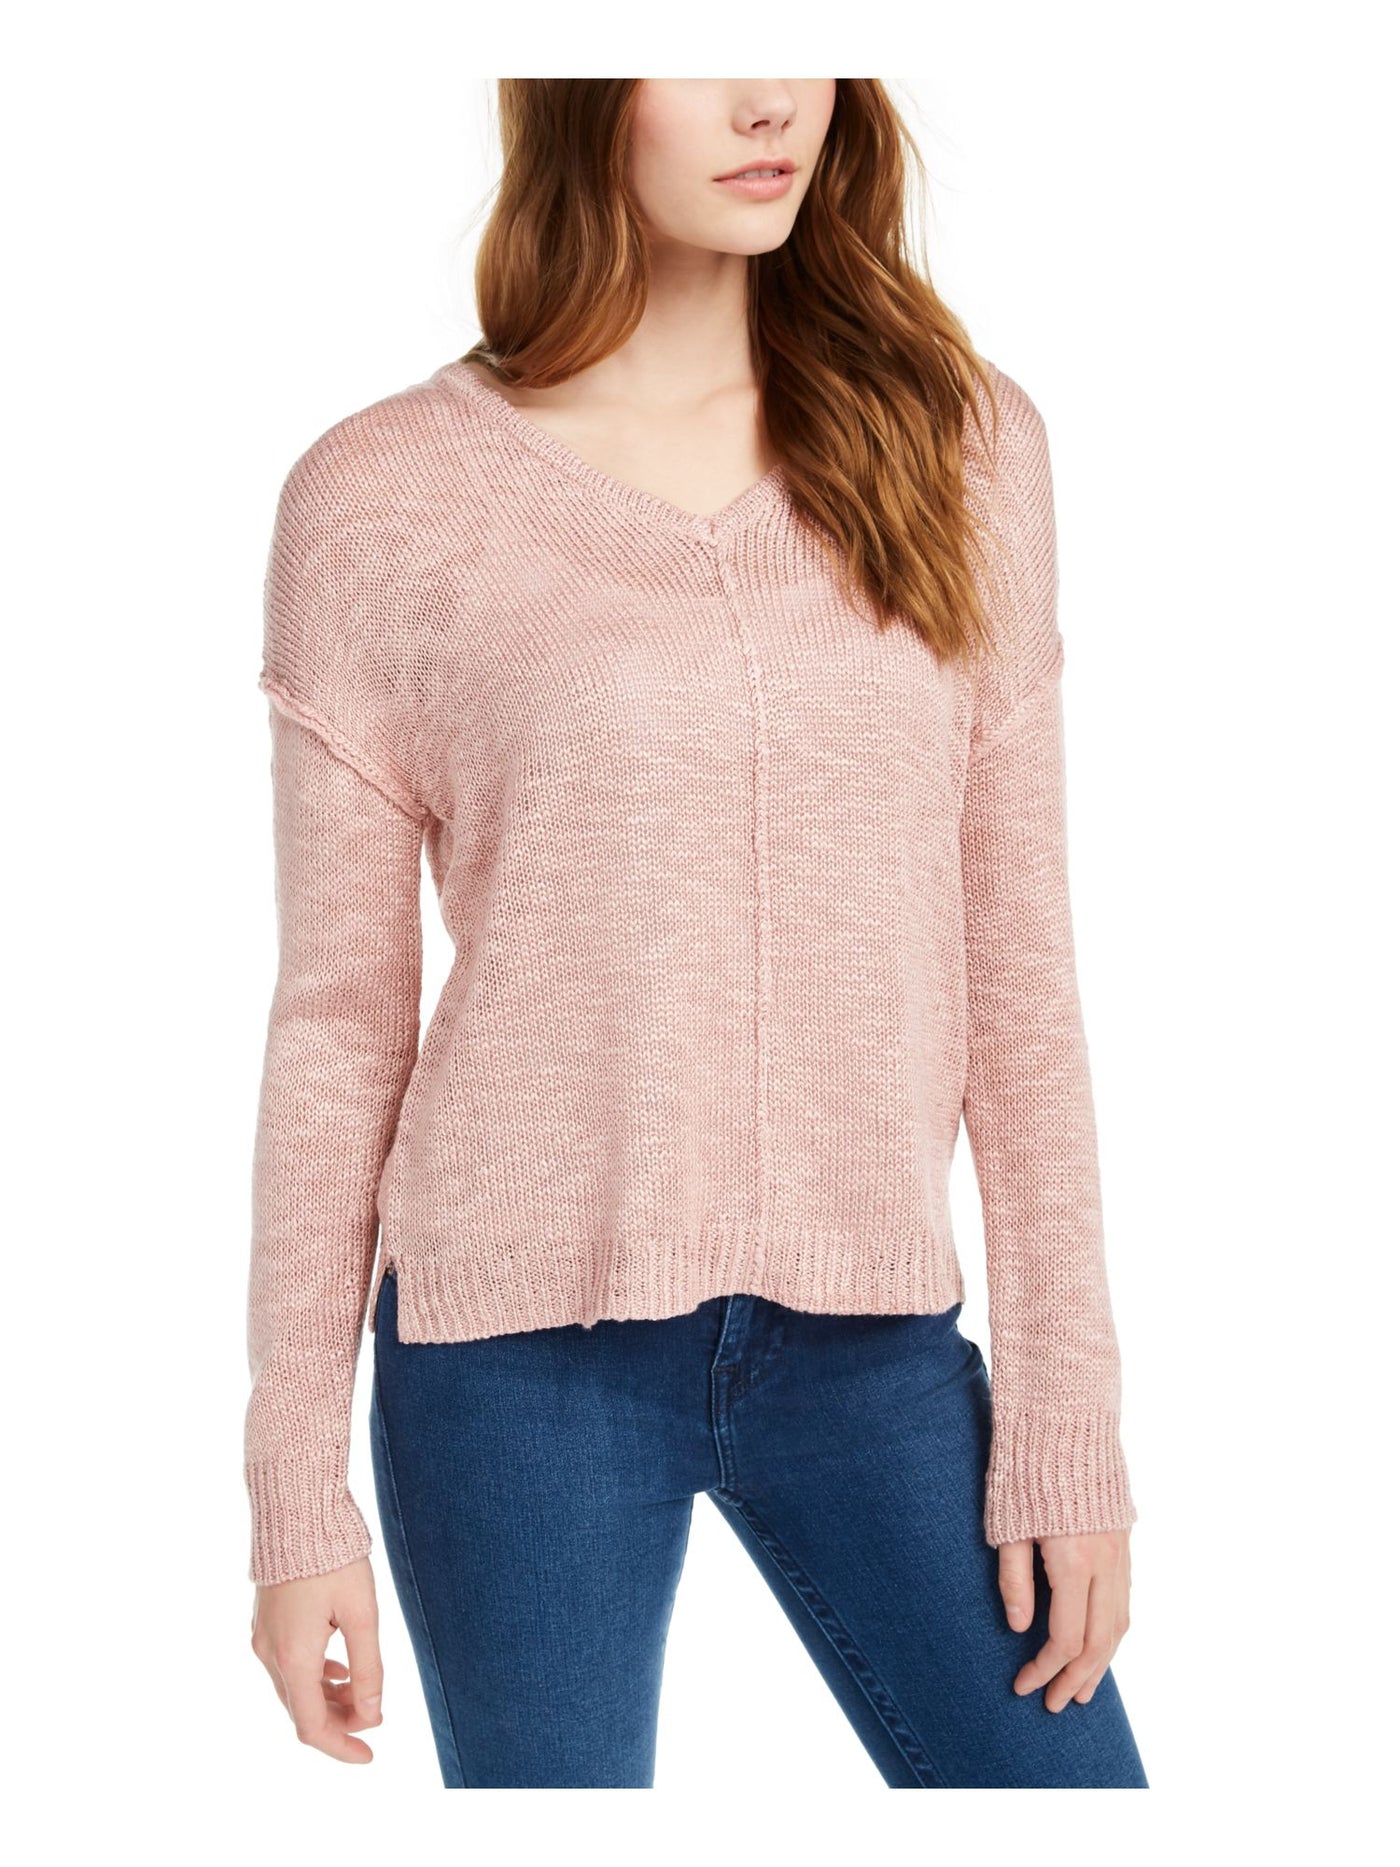 PINK ROSE Womens Pink Heather Long Sleeve Scoop Neck Button Up Sweater Juniors S